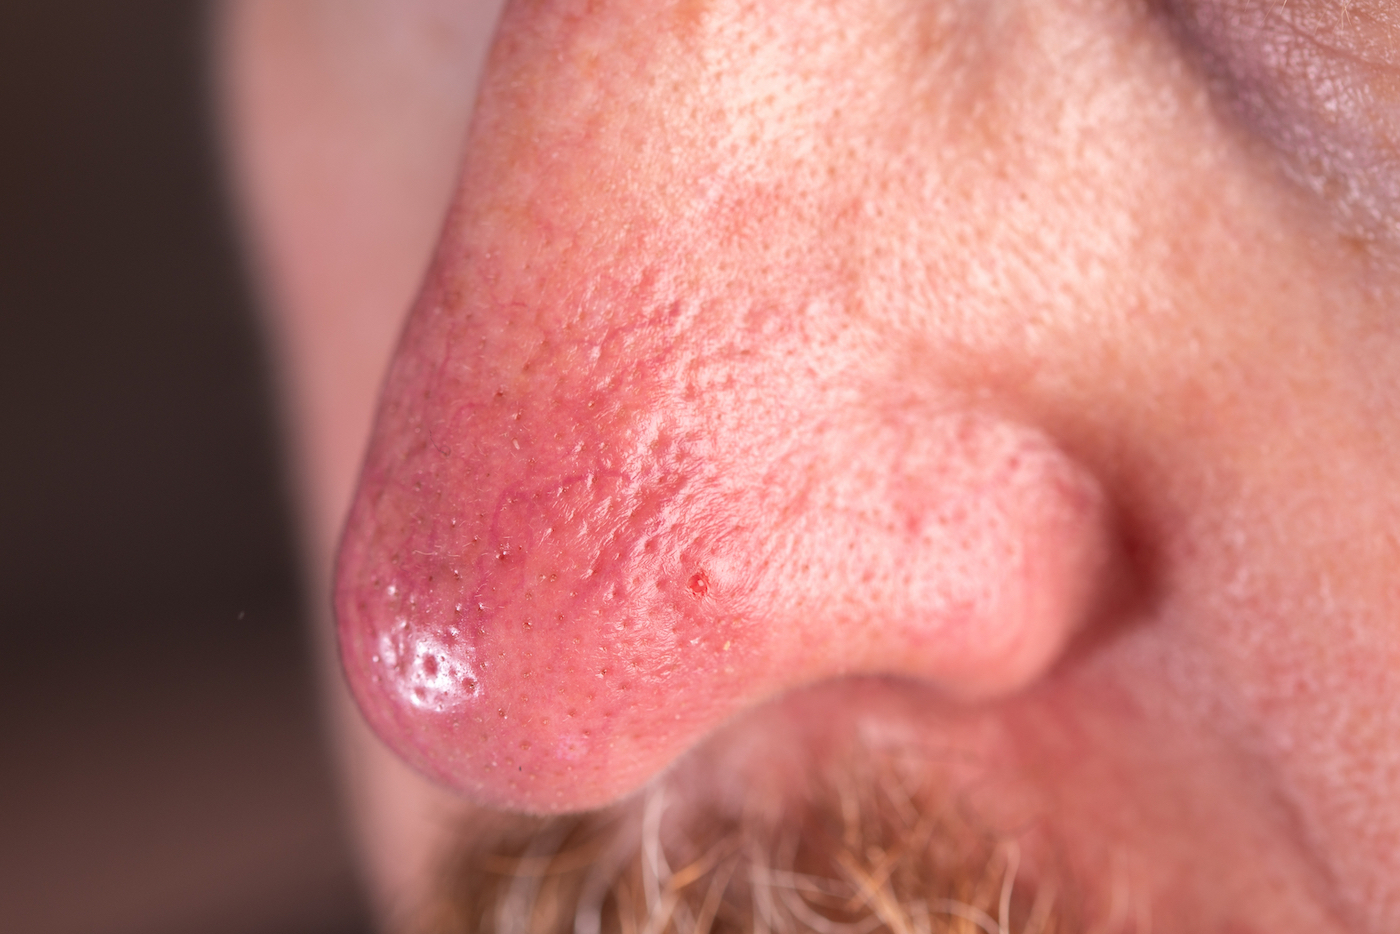 Close-up of a Type 3 Phymatous Rosacea-affected nose with visible pores and redness characteristic of the condition.